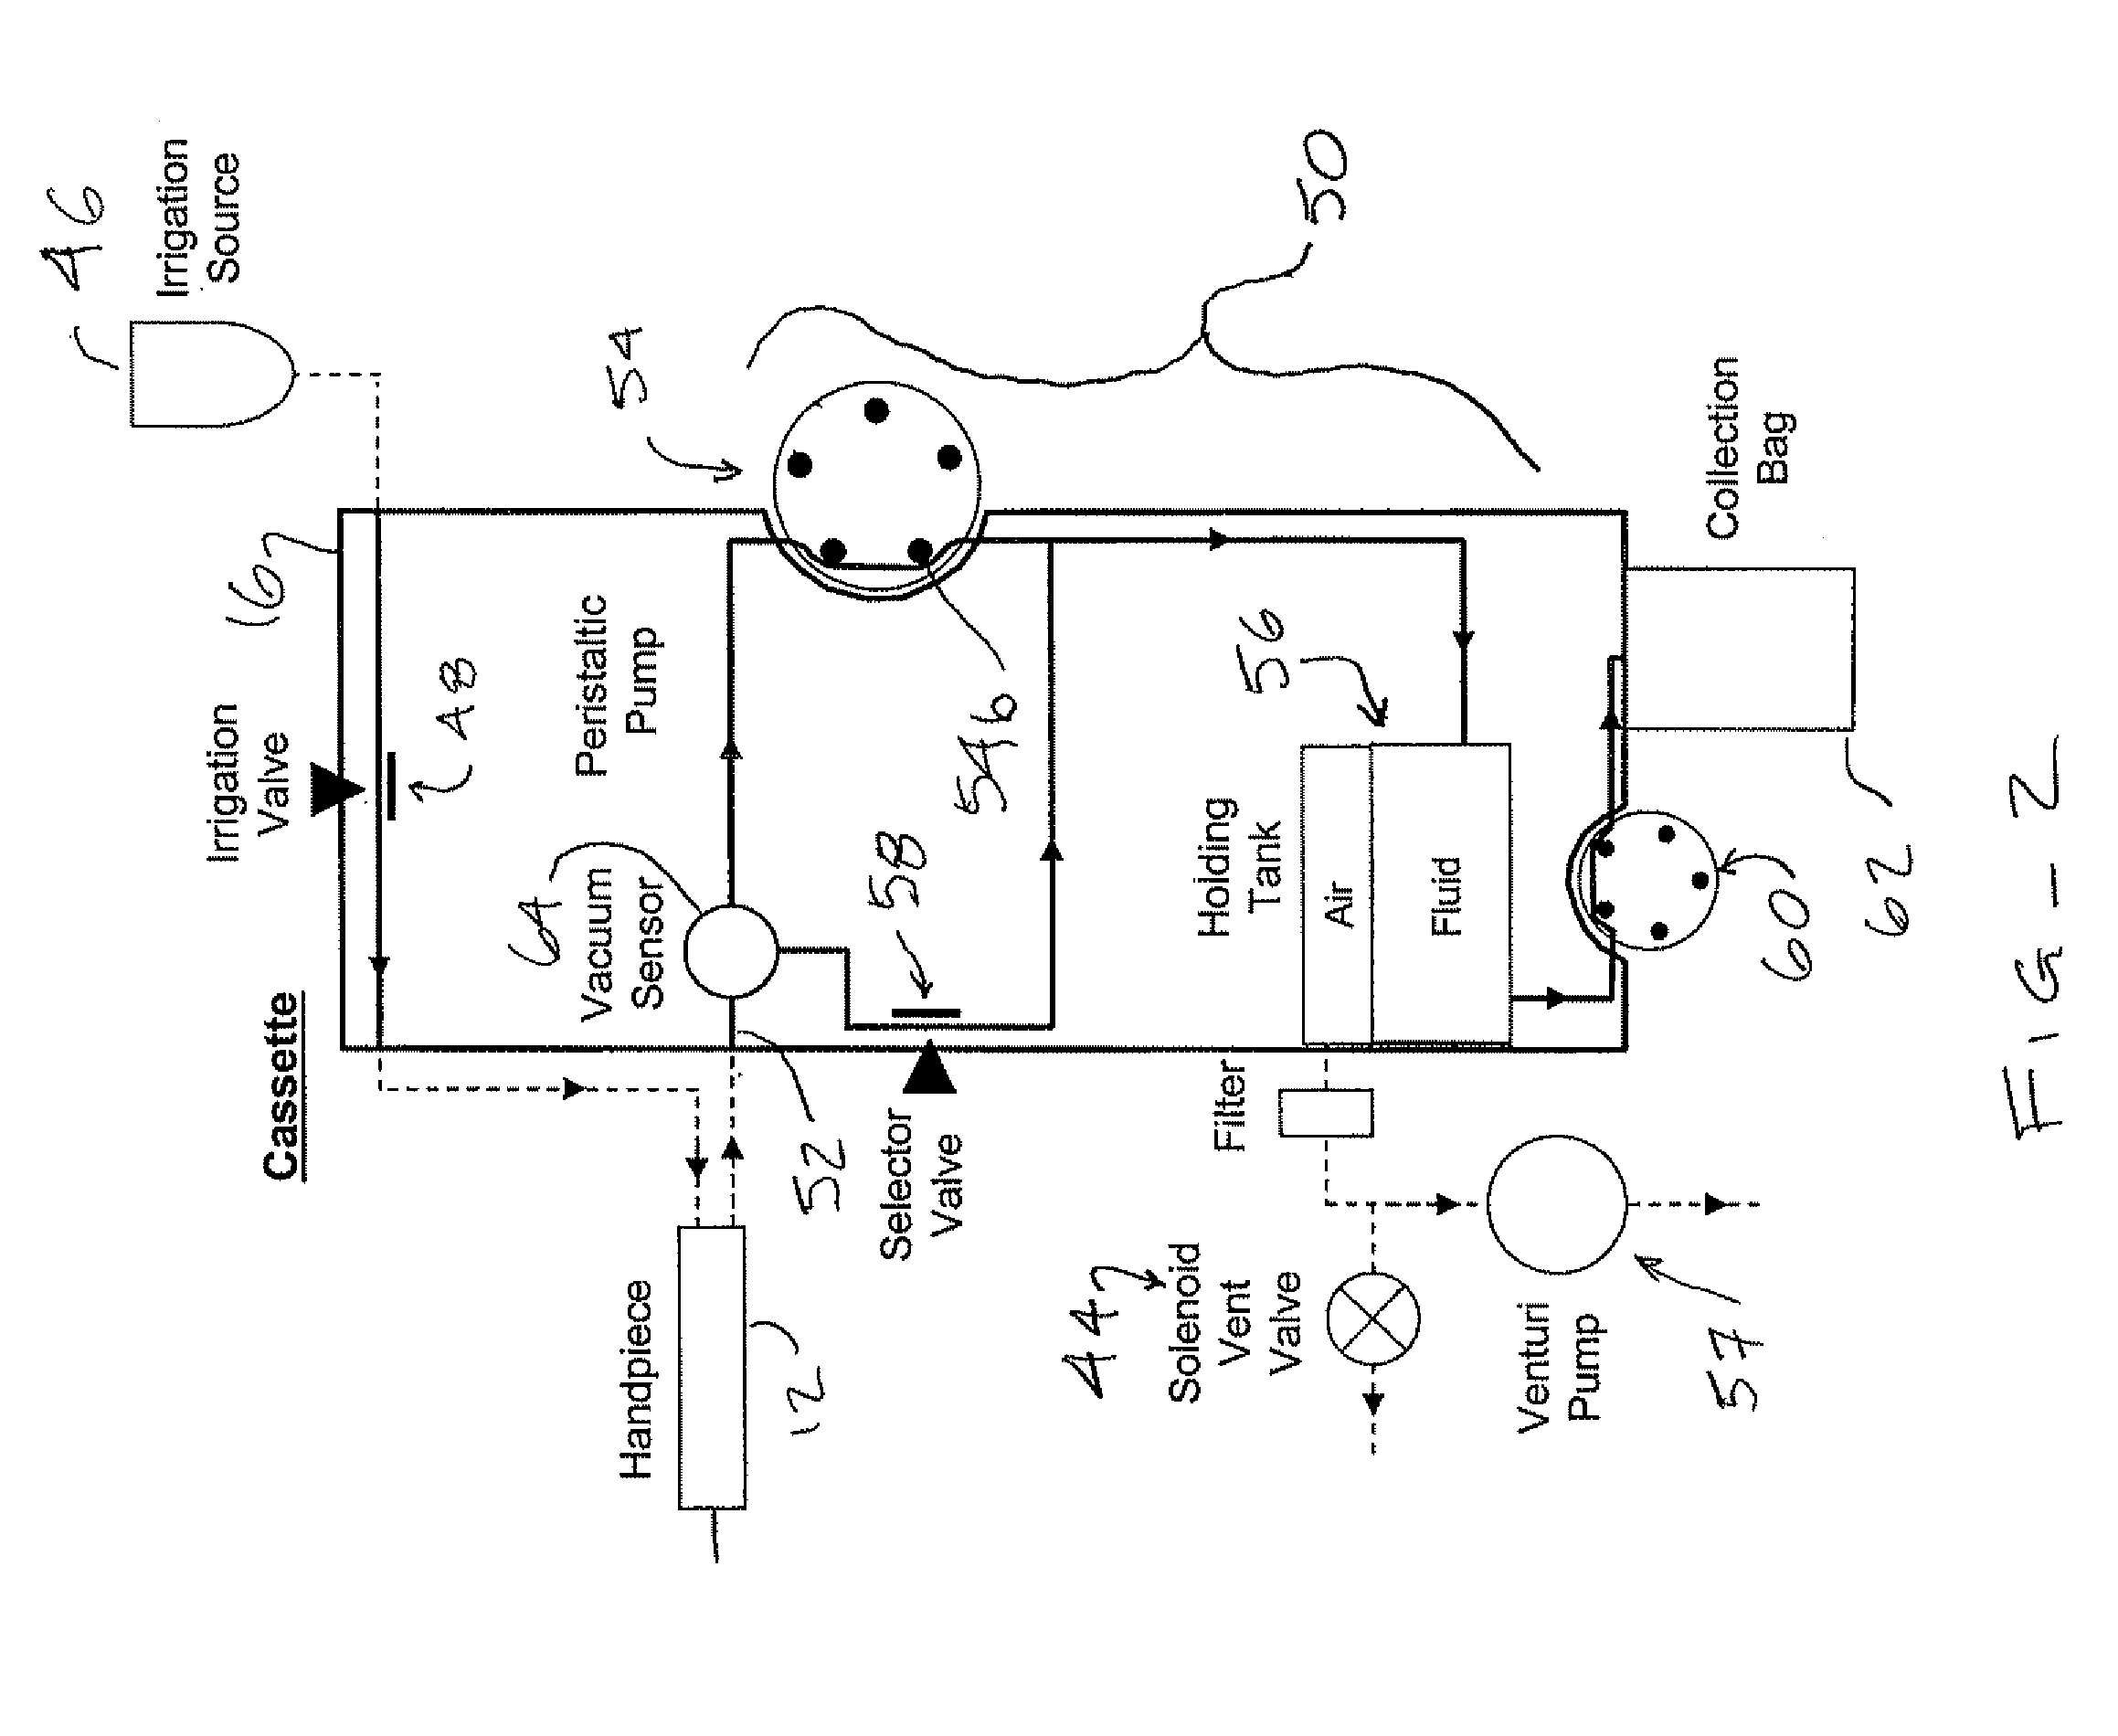 Loading system for alignment of fluidics cassette to console